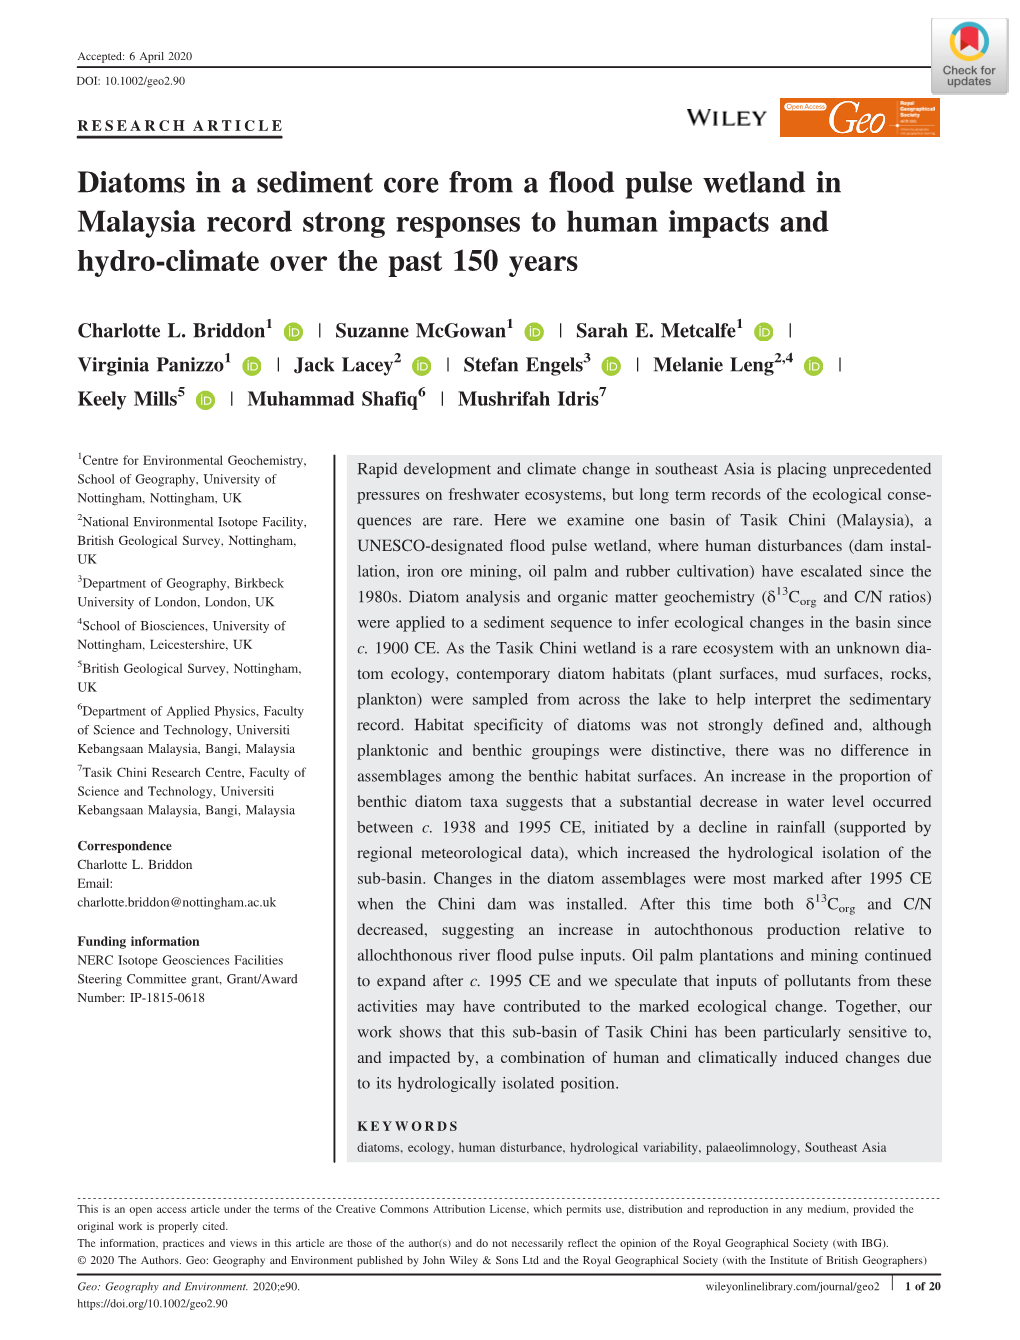 Diatoms in a Sediment Core from a Flood Pulse Wetland in Malaysia Record Strong Responses to Human Impacts and Hydro‐Climate Over the Past 150 Years